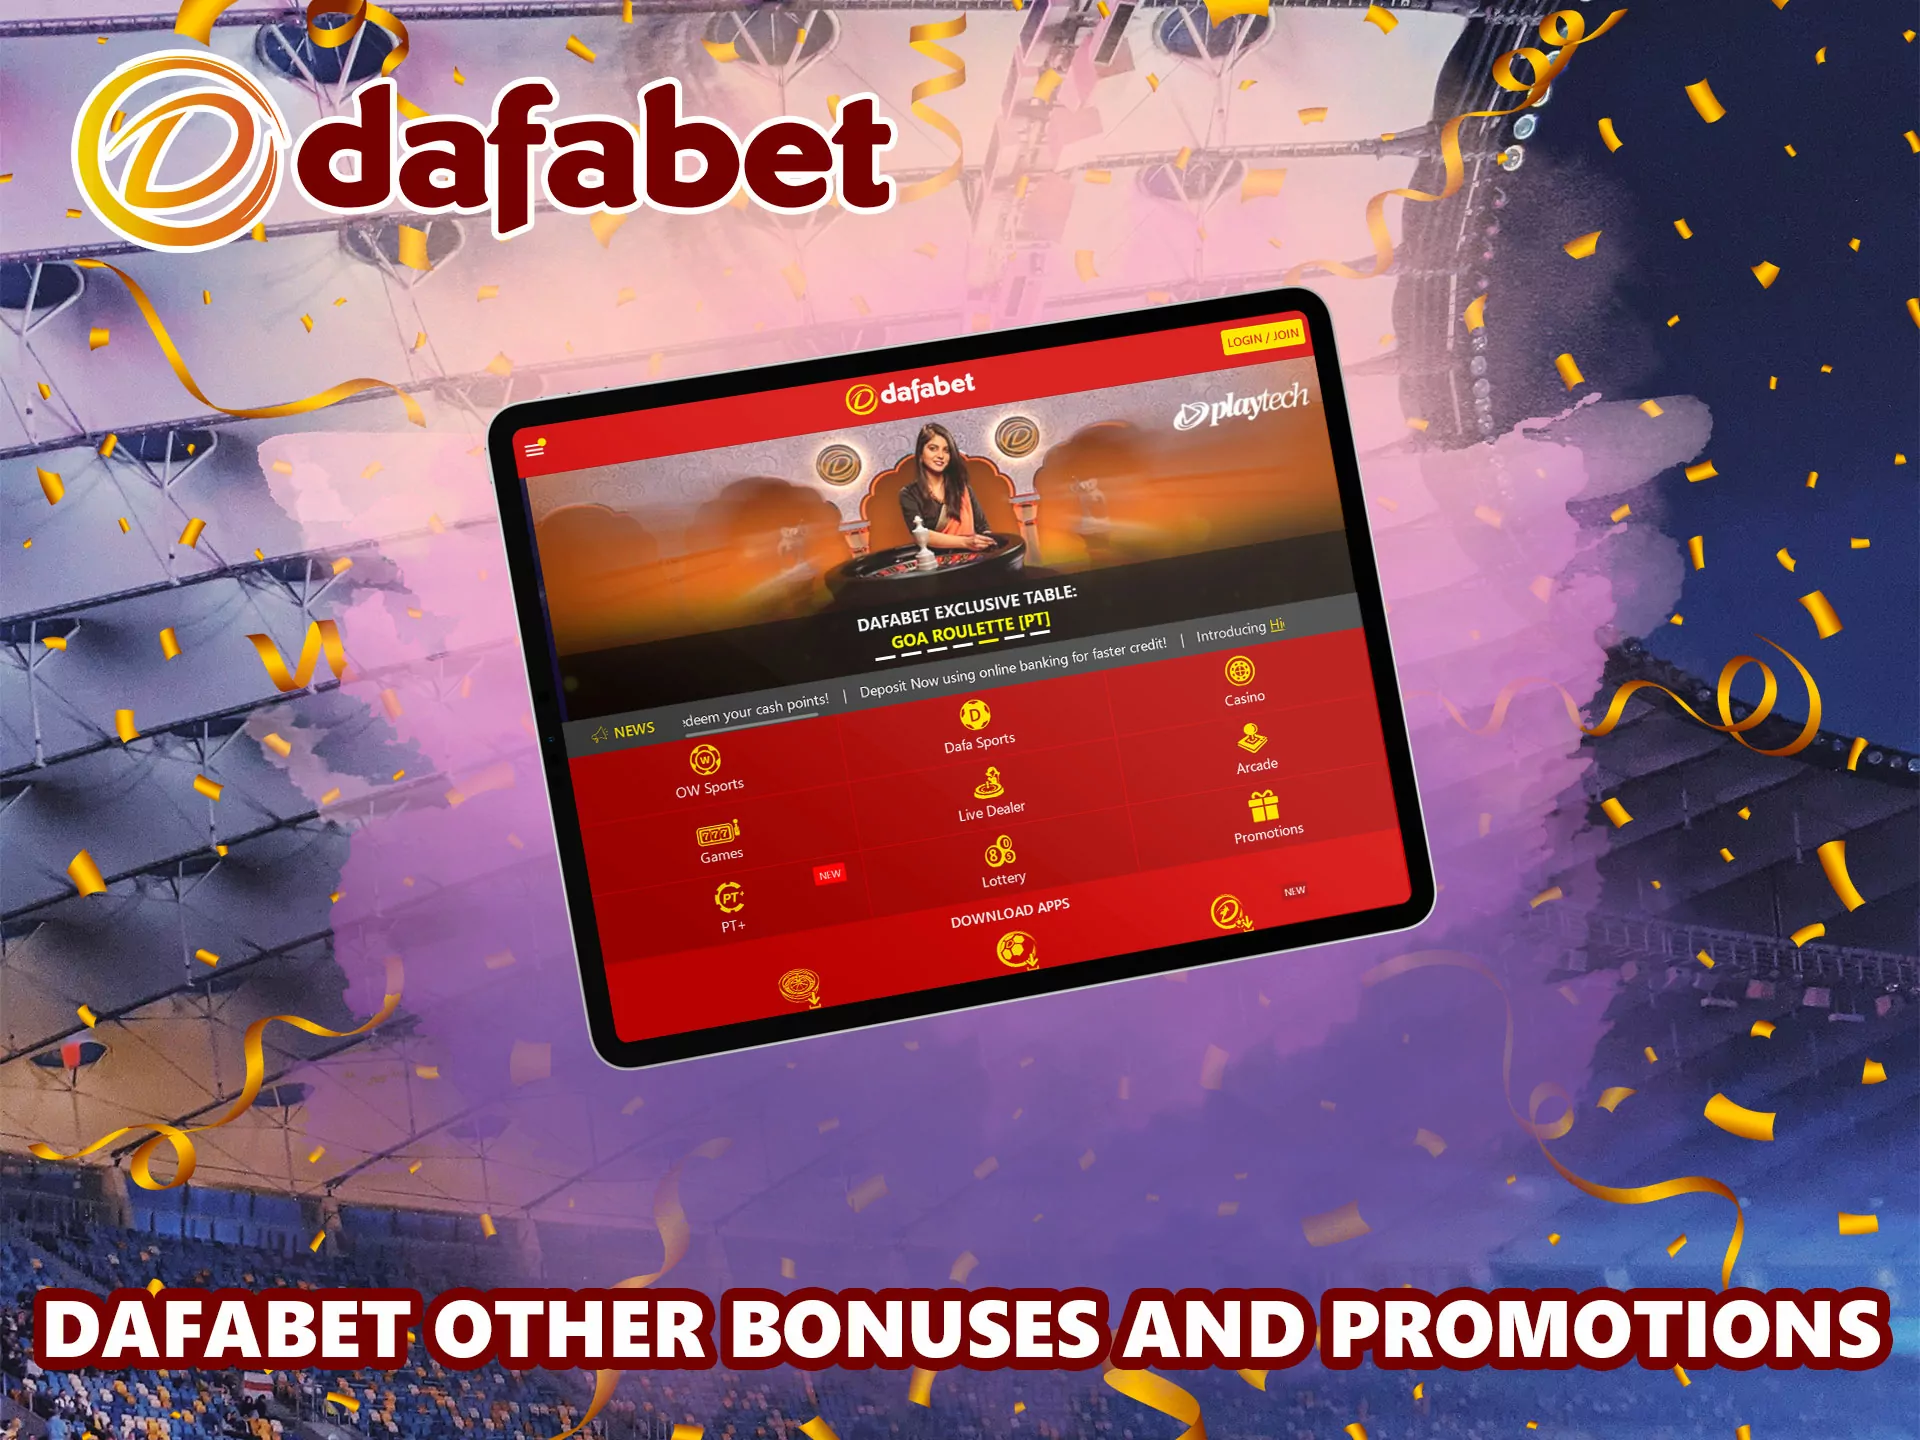 Bookmaker in addition to the discount on the first deposit offers many other bonuses, you are sure to find something interesting for yourself.